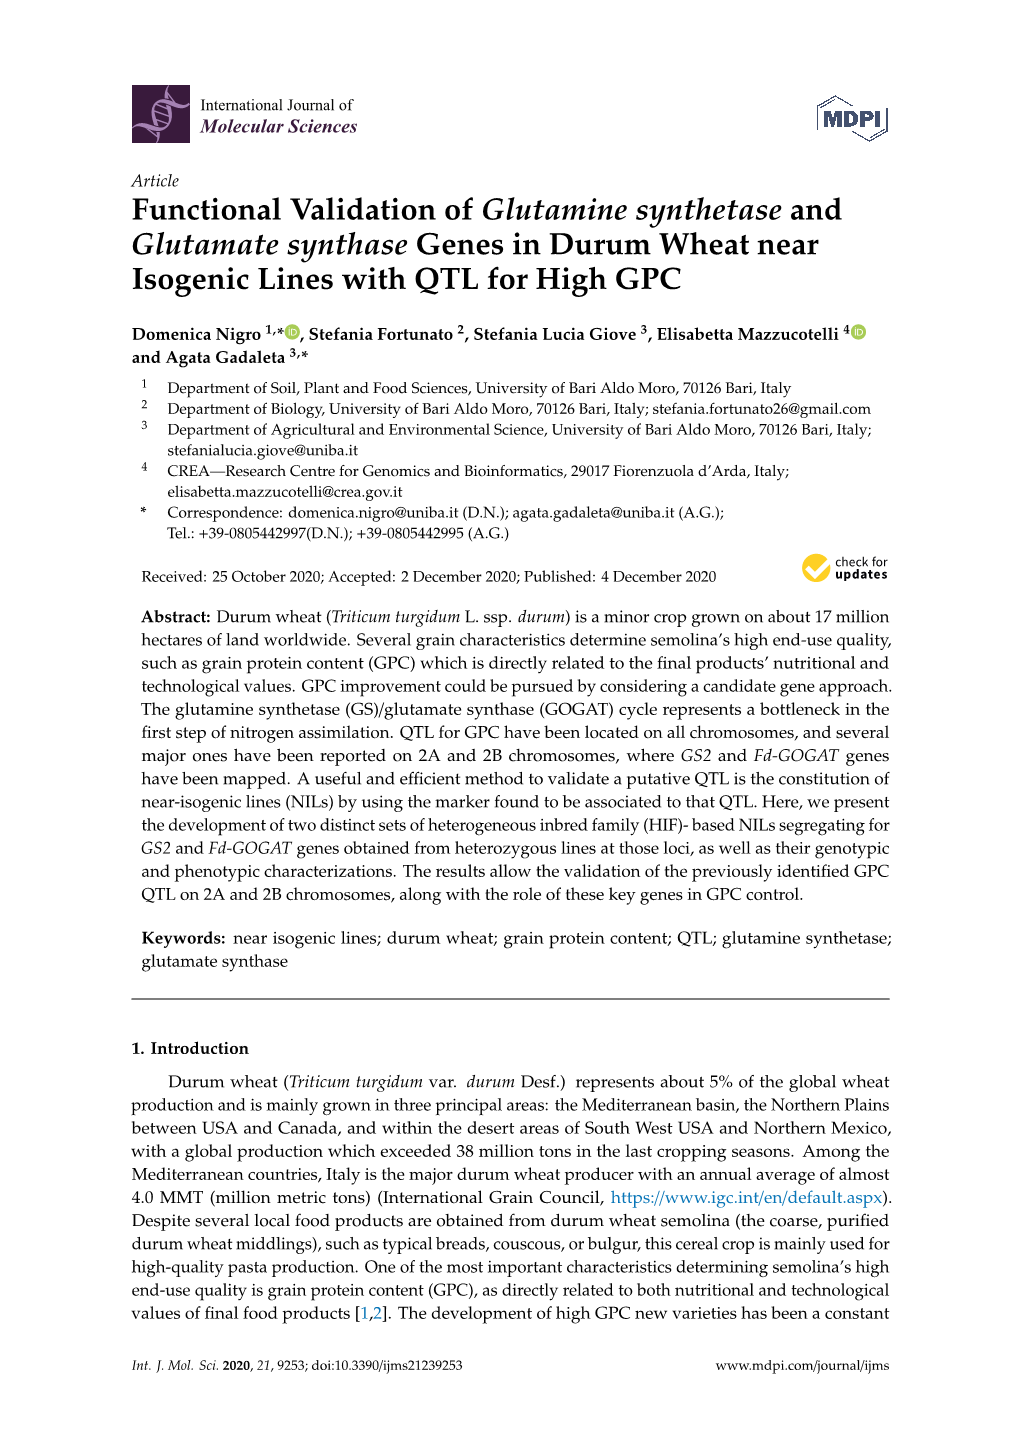 Functional Validation of Glutamine Synthetase and Glutamate Synthase Genes in Durum Wheat Near Isogenic Lines with QTL for High GPC